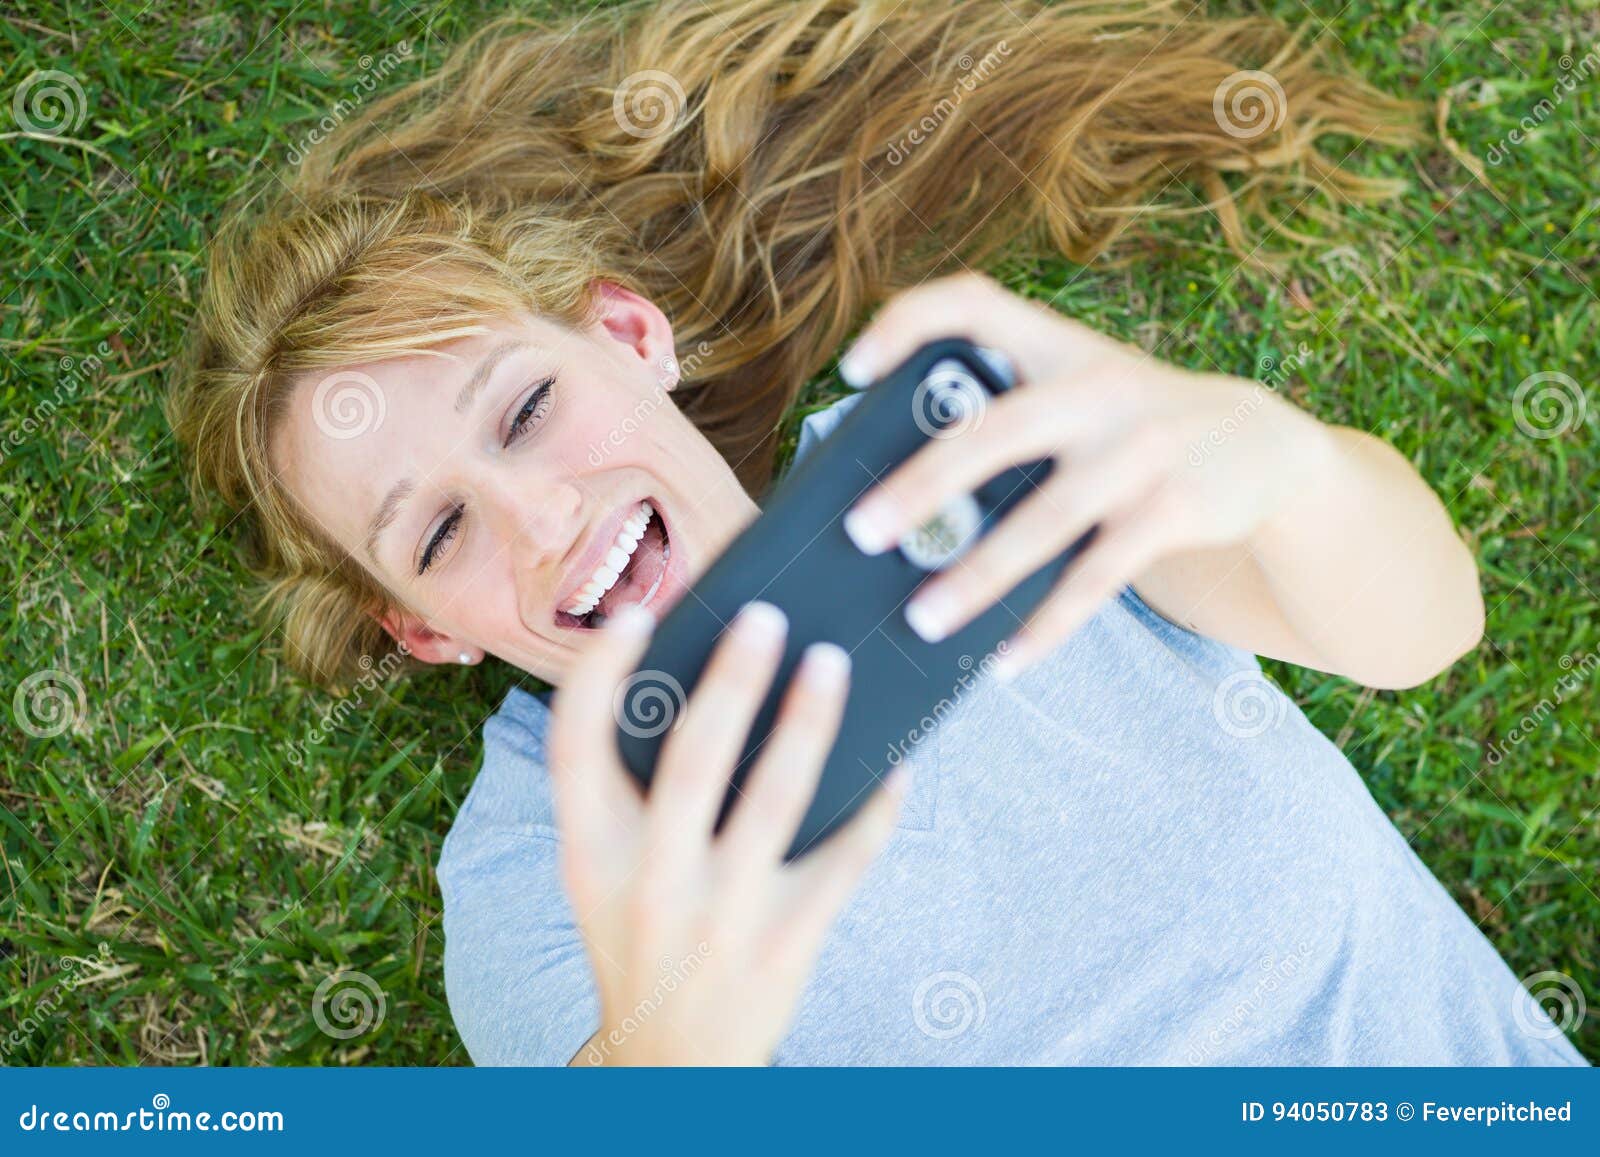 Young Adult Woman Laying in Grass Taking Selfie on Smart Phone.